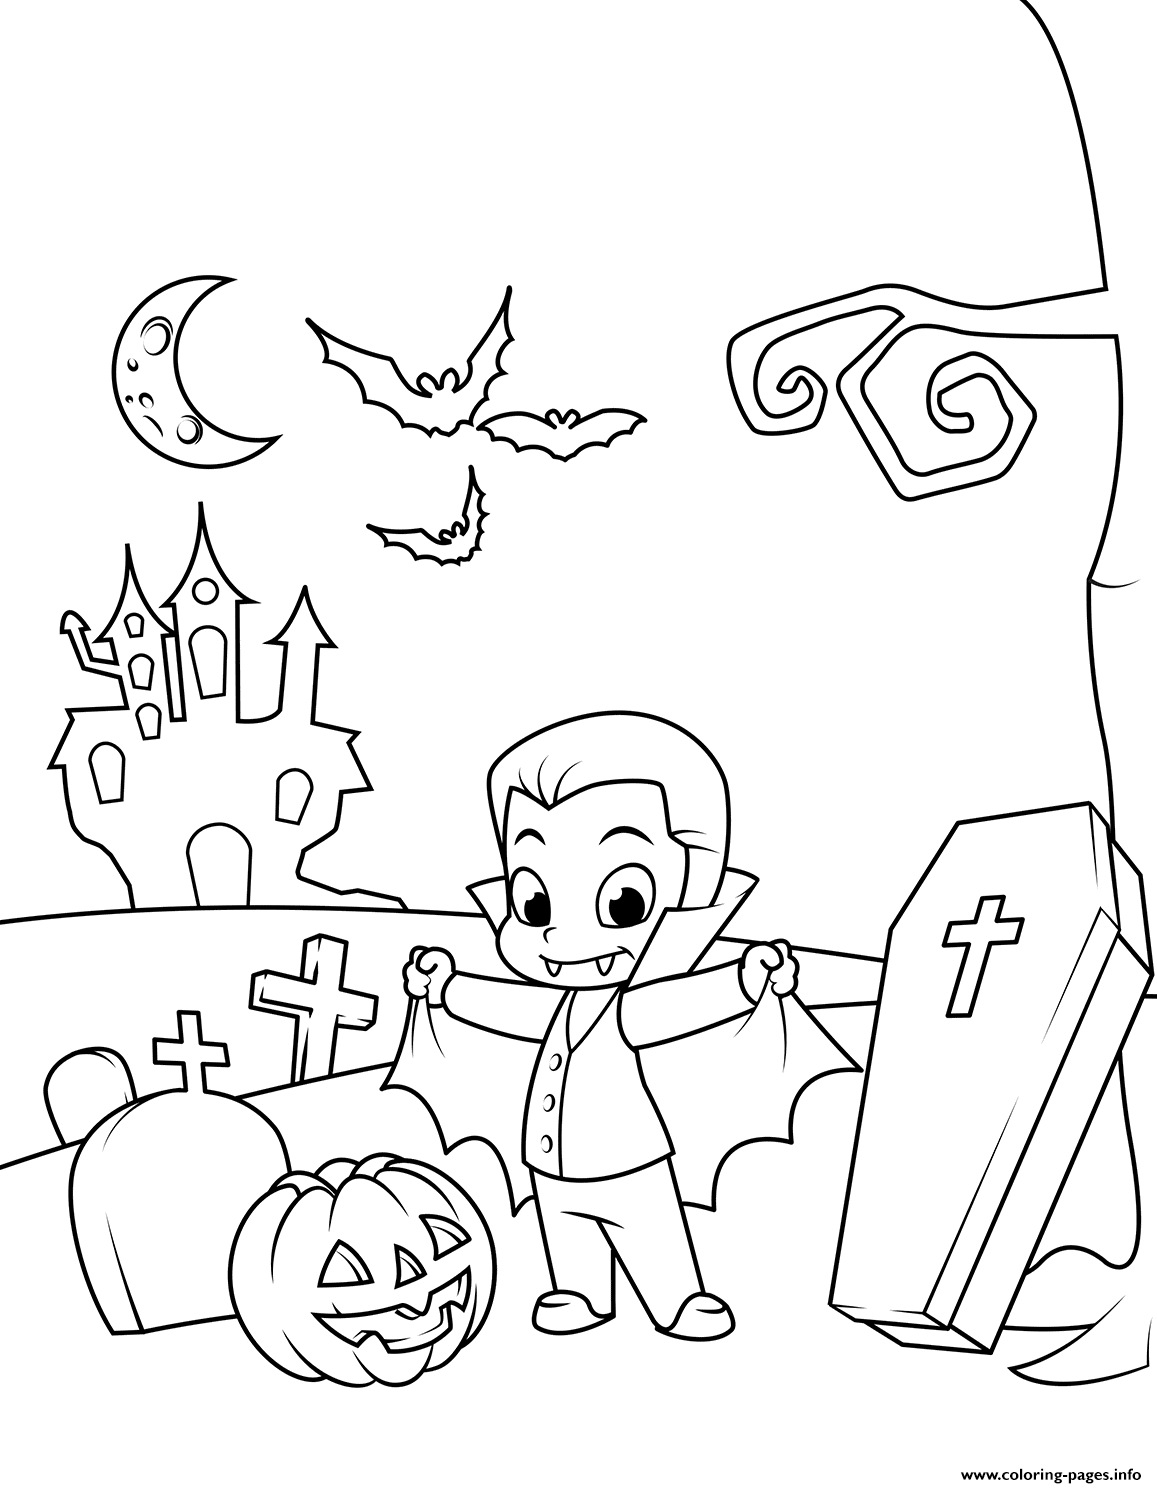 Cute Count Dracula In The Cemetery Halloween coloring